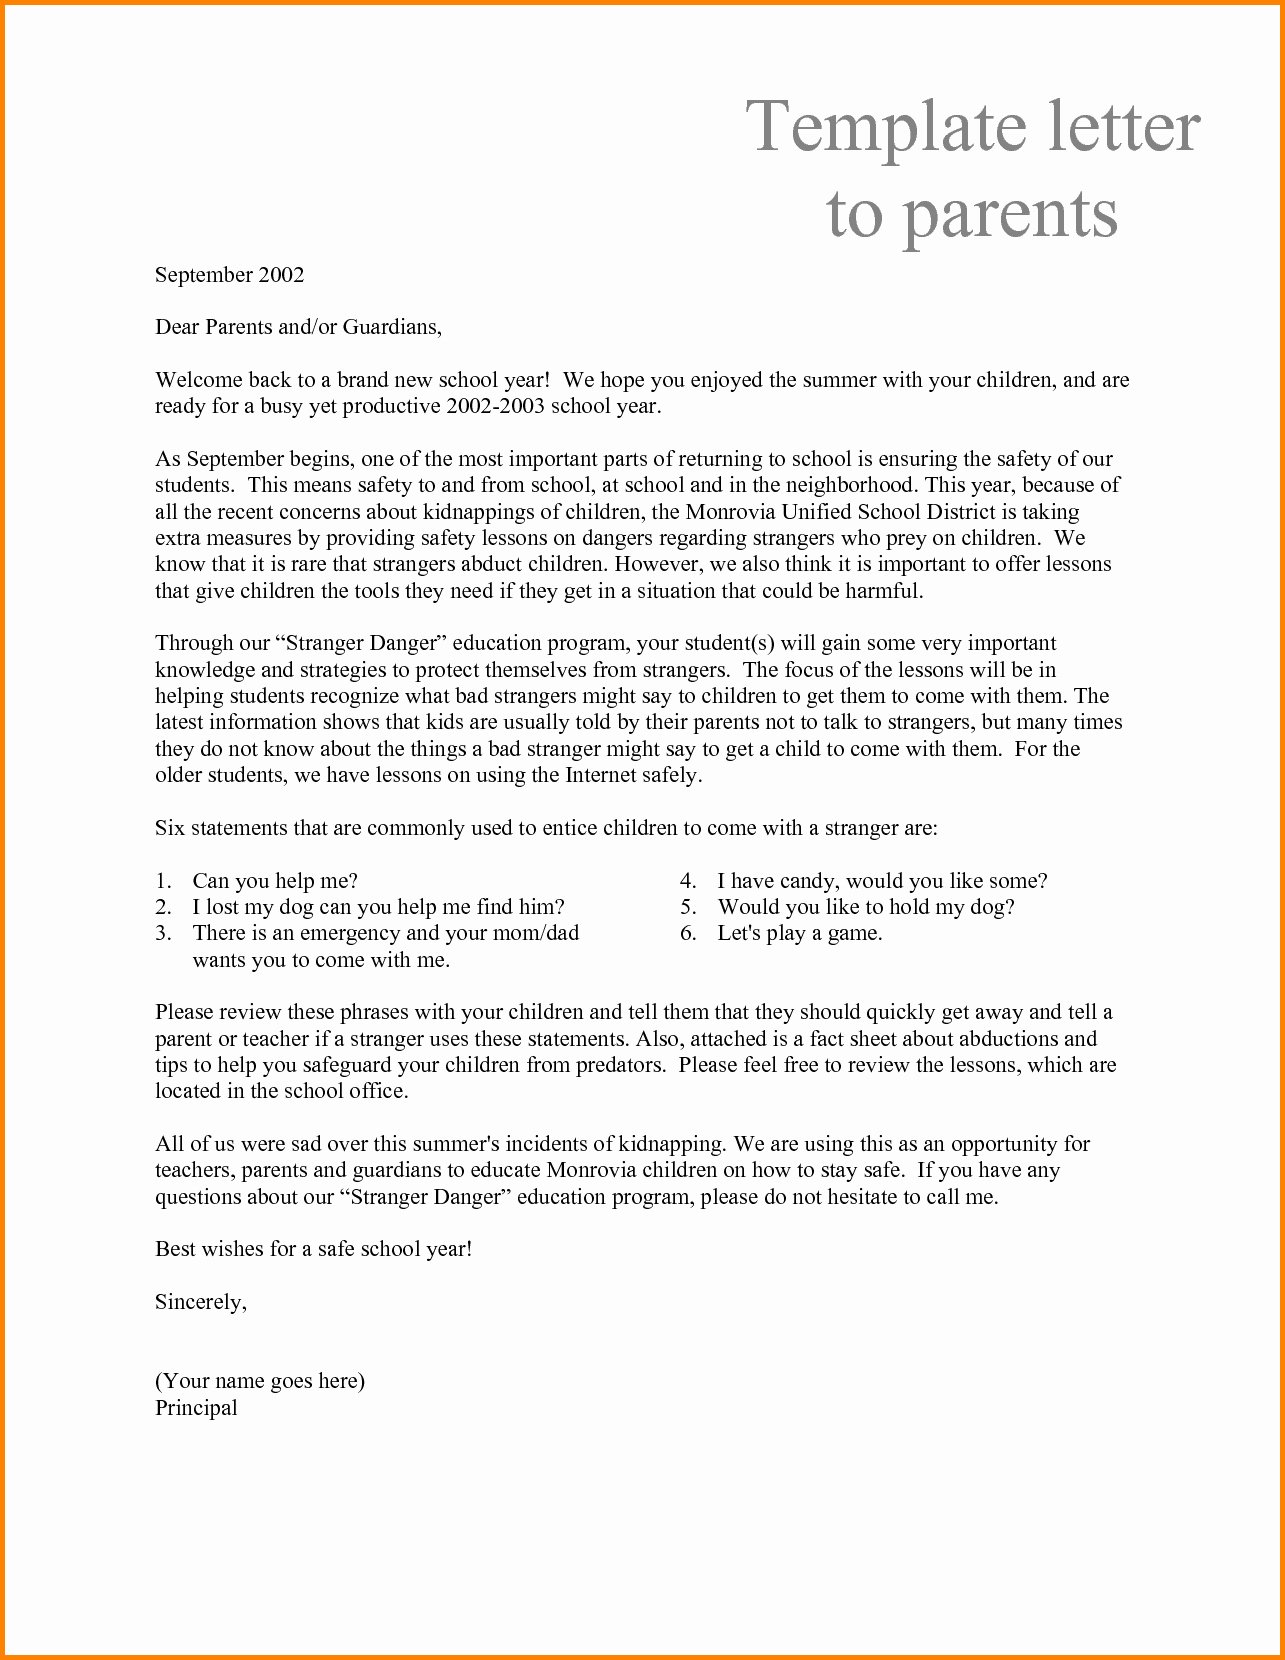 Letters to Parents Template New Daycare Letter to Parents Template Collection